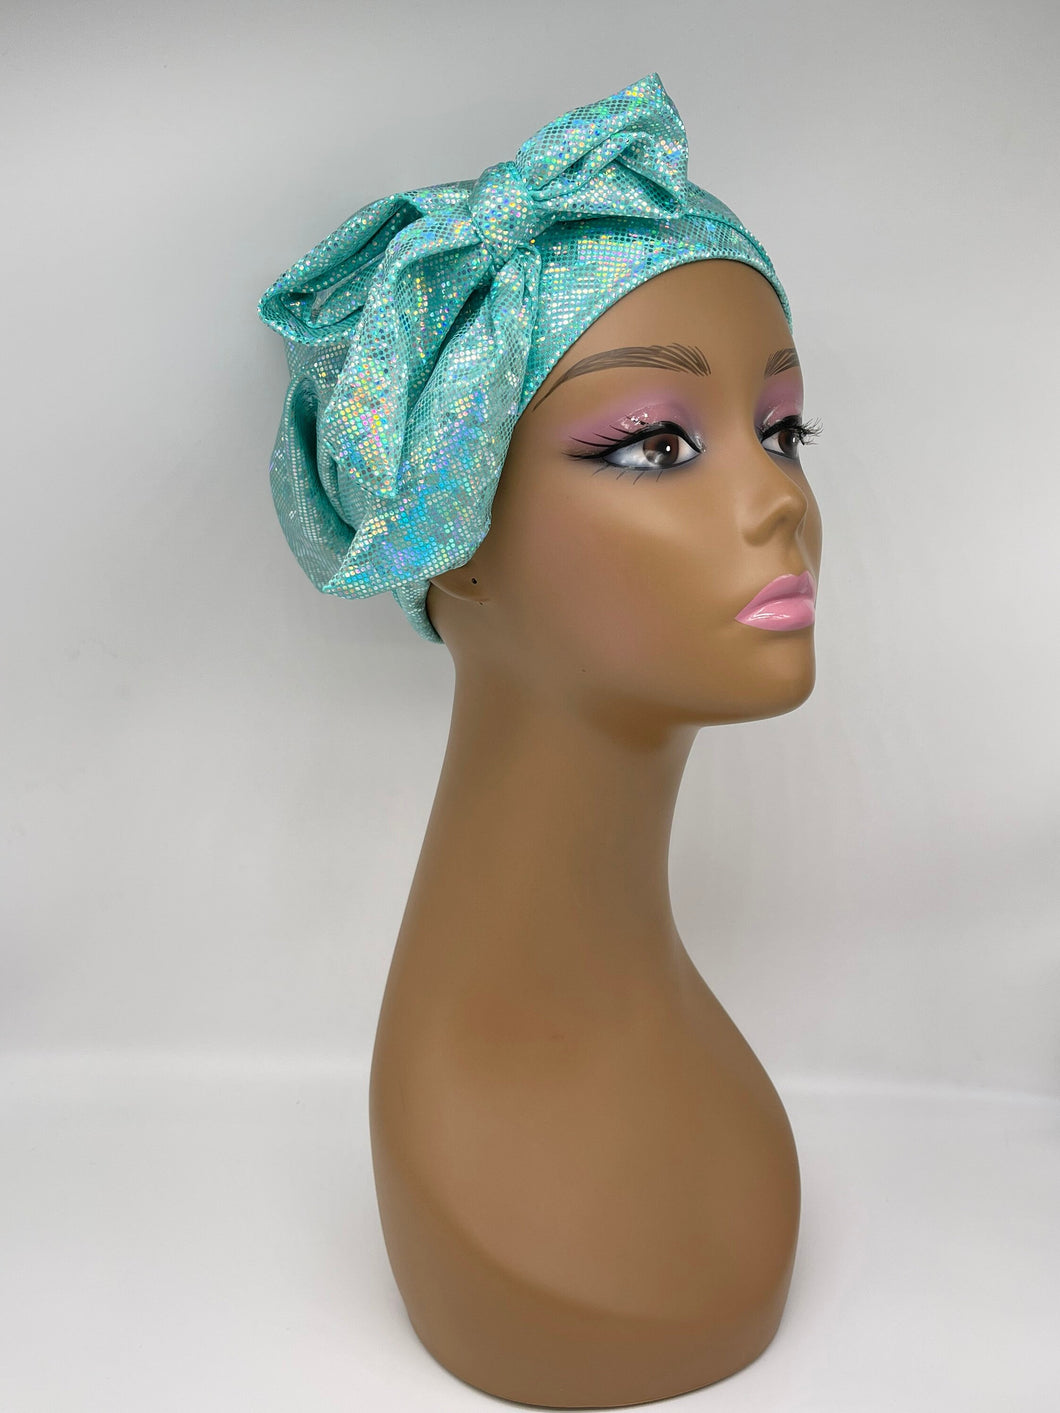 Niceroy stretch fabric scrub cap, sleep cap, slouchy hat chemo cap Holographic fabric hat, Easy on and adjustable circumference